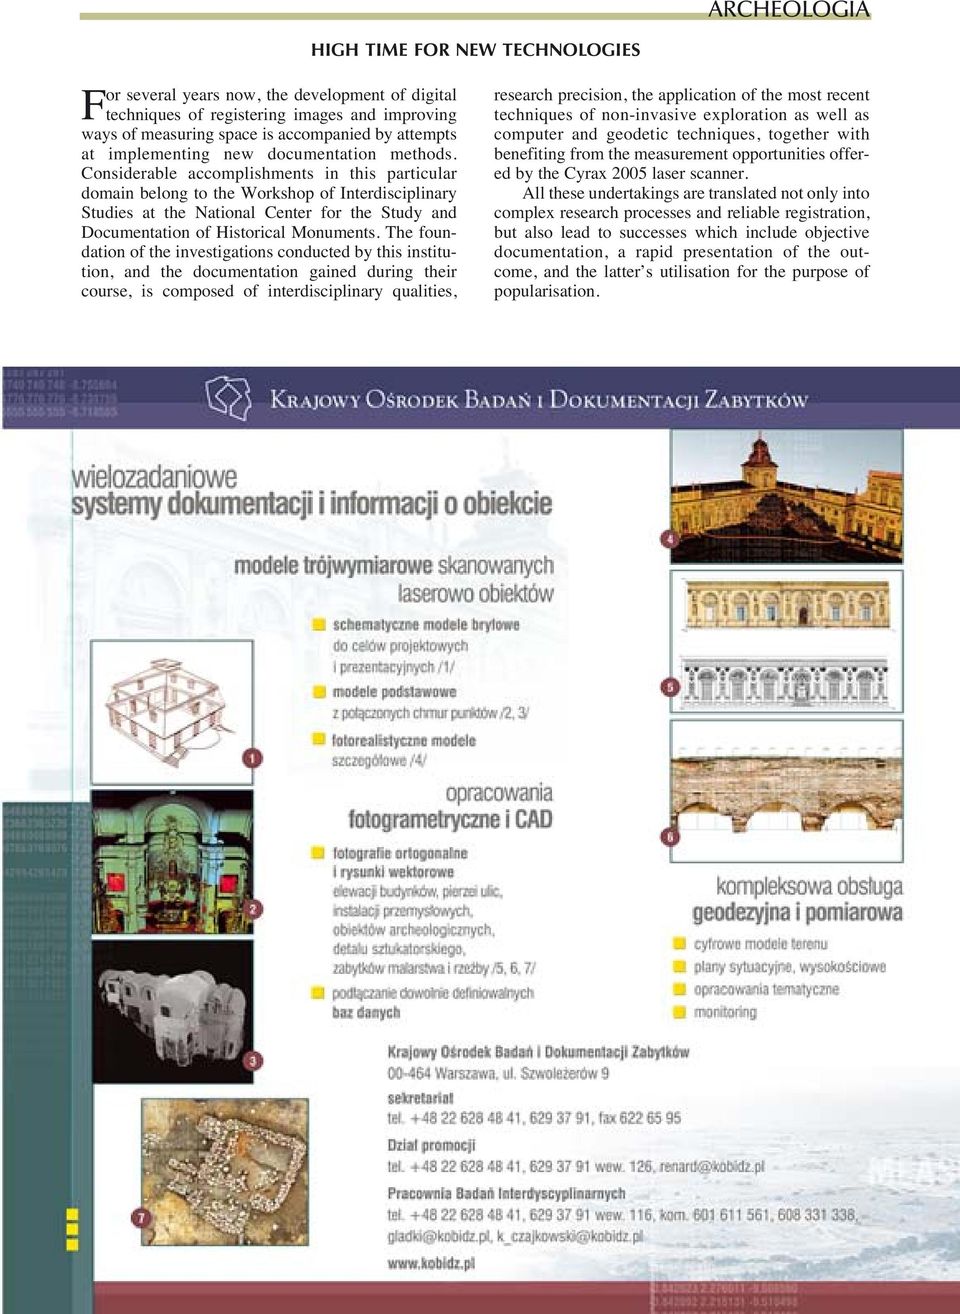 Considerable accomplishments in this particular domain belong to the Workshop of Interdisciplinary Studies at the National Center for the Study and Documentation of Historical Monuments.